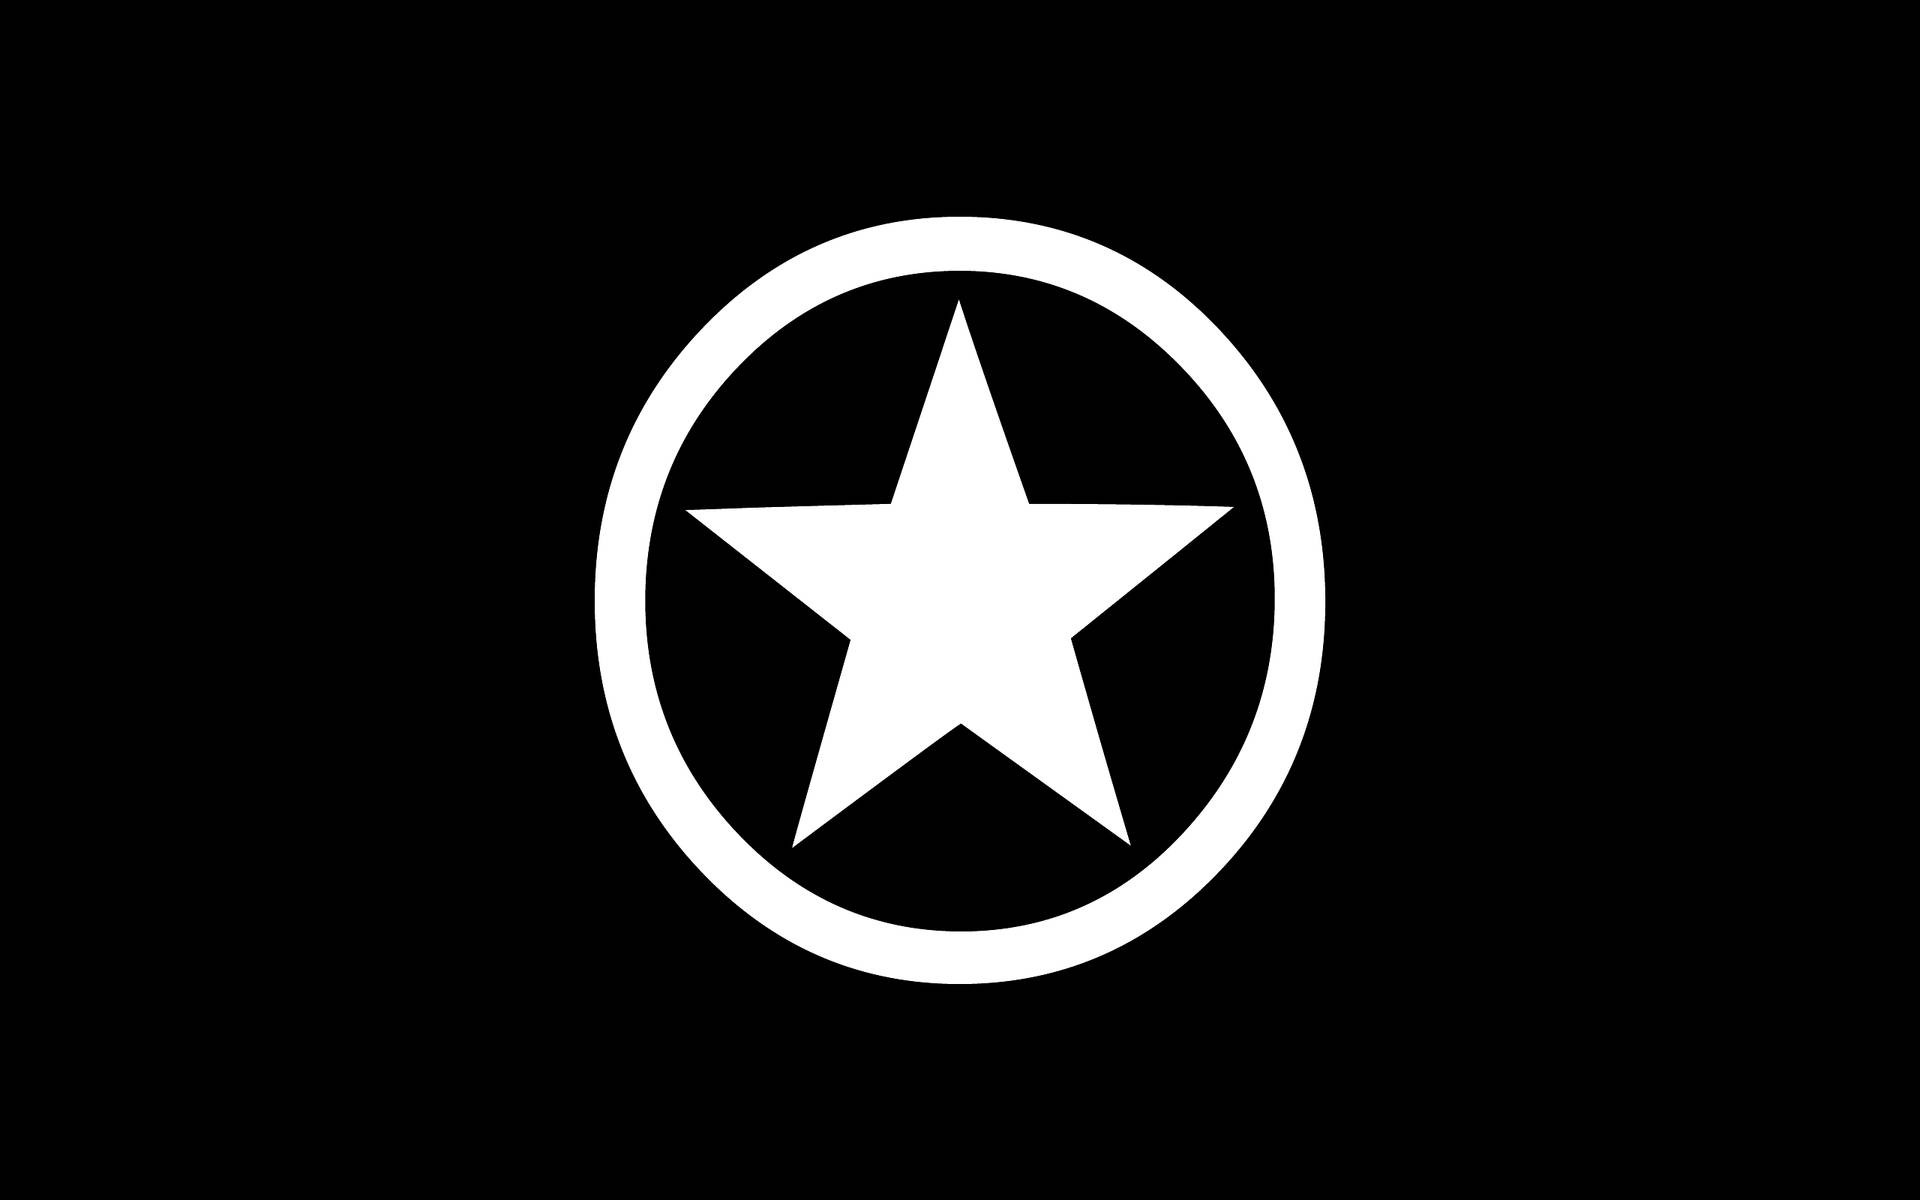 Classic Converse Logo With Iconic Star Background